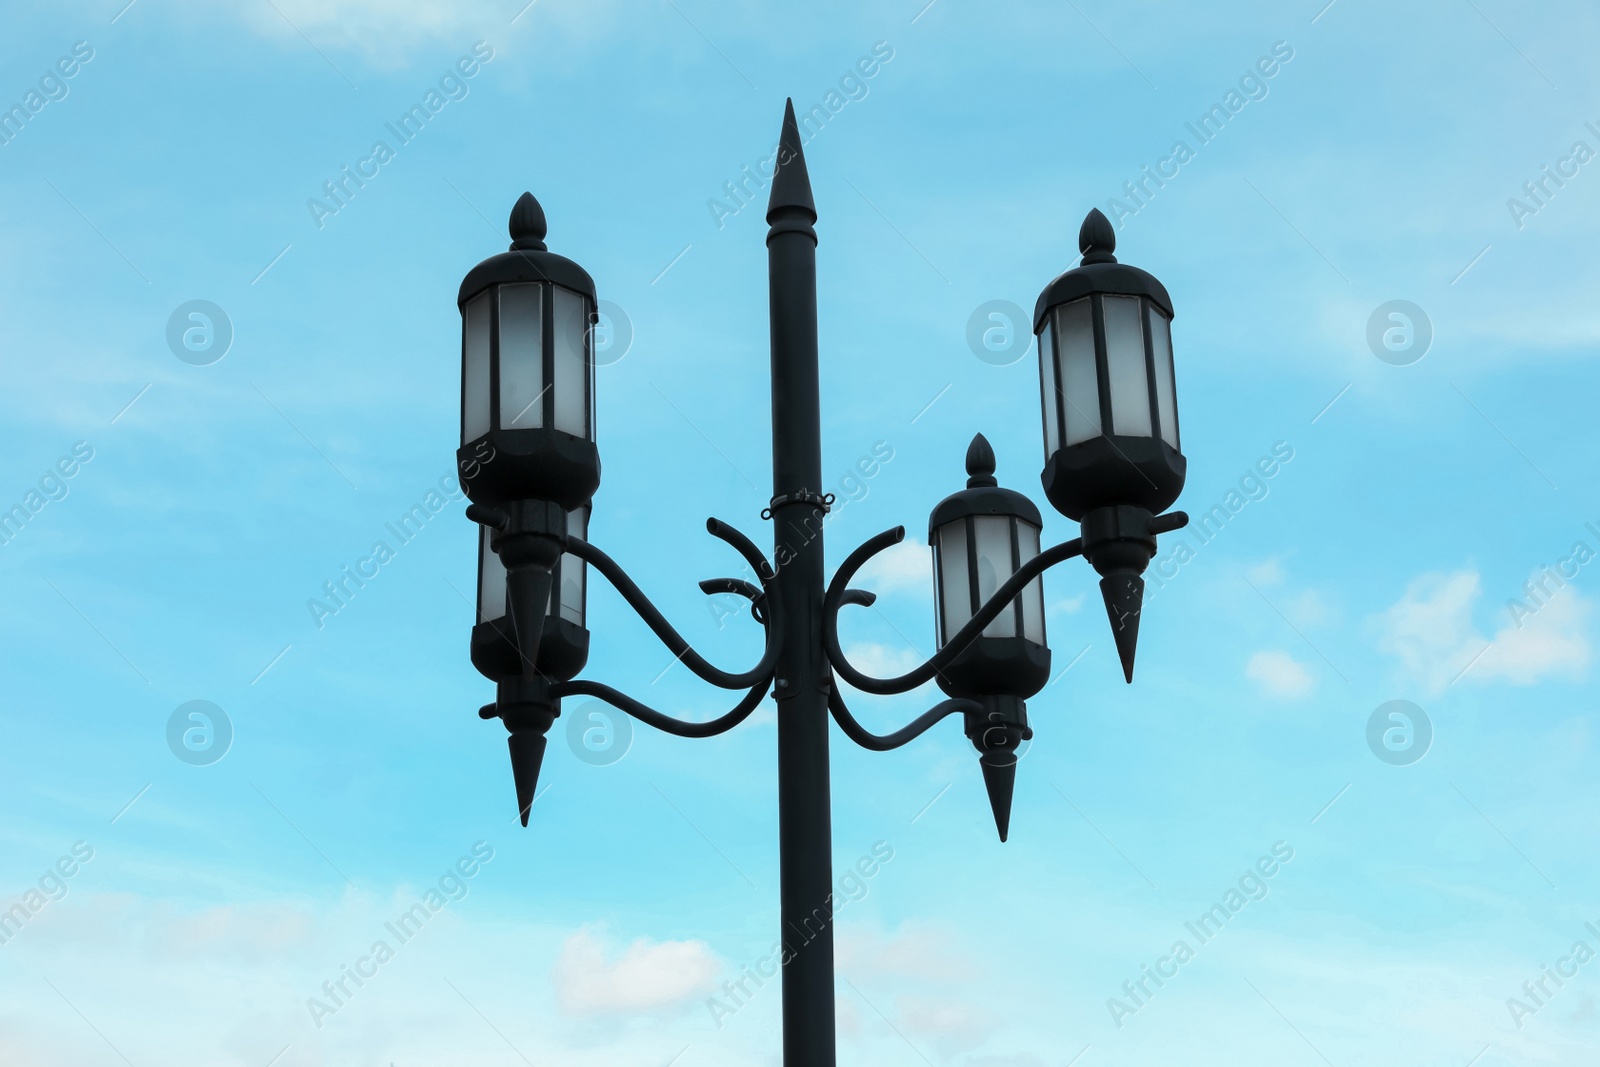 Photo of Old fashioned street light lamp against cloudy sky